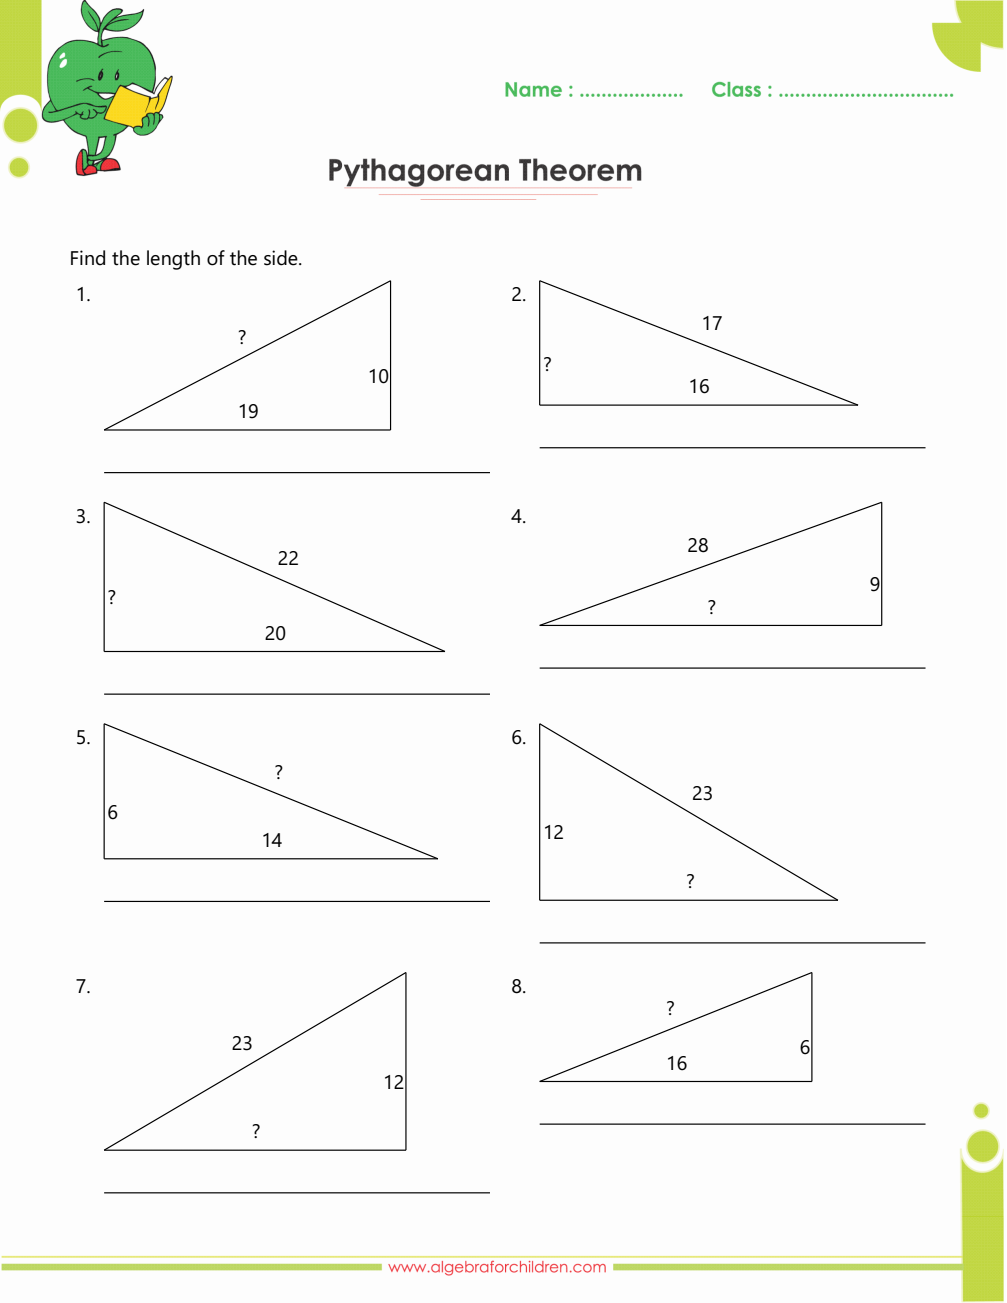 solve right triangle calculator, right triangle trigonometry word problems, right triangle trigonometry worksheets,
right triangle trigonometry problems, right triangle trigonometry calculator, how to solve a right triangle with one side and one angle, right triangle trig finding missing sides and angles, right triangle trig word problems worksheet, pythagorean theorem worksheets with answer key pdf, pythagorean theorem word problems, pythagorean theorem worksheet pdf, pythagorean theorem worksheet with answers, pythagorean theorem word problems worksheet, pythagorean theorem worksheets grade 9 pdf, pythagorean theorem worksheets grade 8 pdf, pythagorean theorem worksheets with answers grade 10, pythagorean theorem worksheet grade 7 pdf,  pythagorean theorem worksheet grade 8 with answers